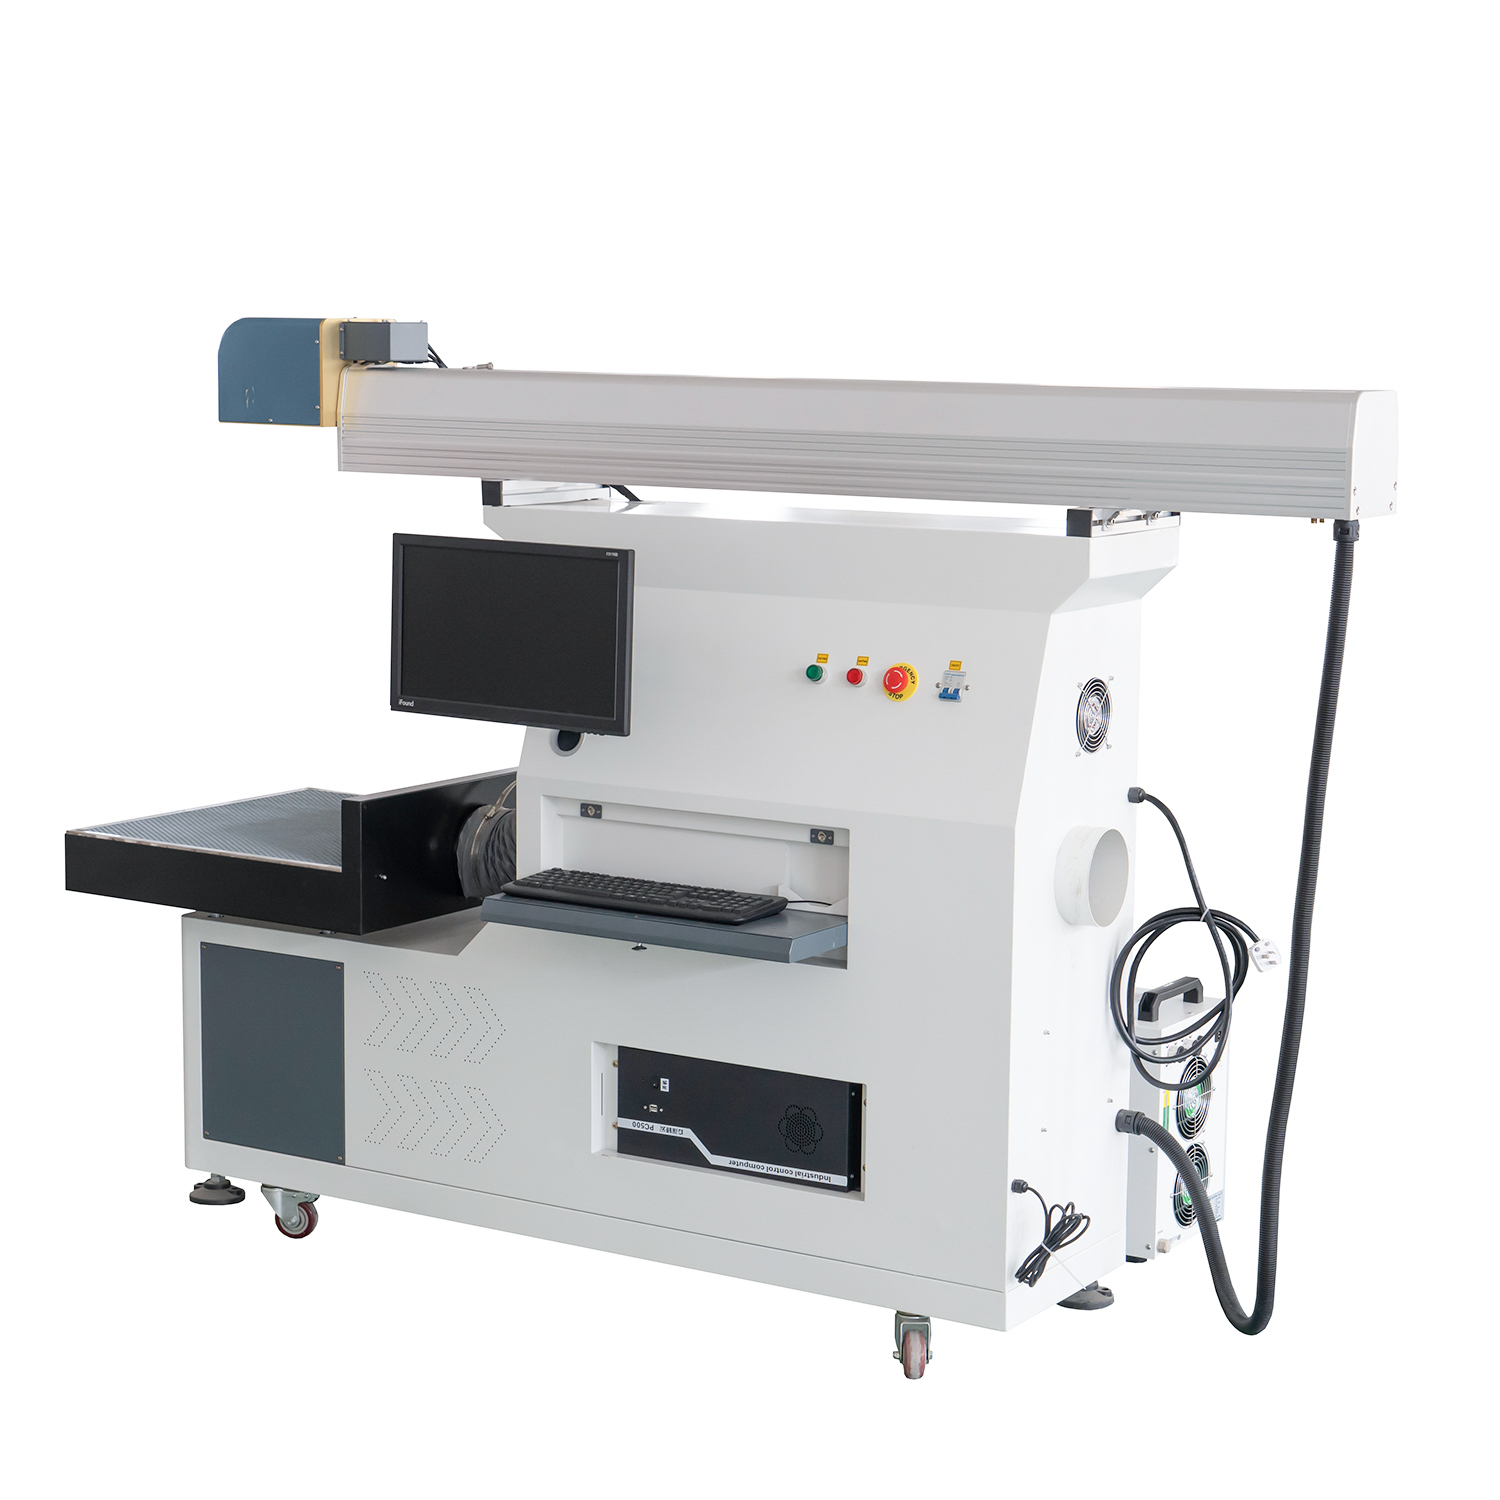 3D dynamic focusing Galvo co2 laser marking machine with glass laser tube for large area marking cutting